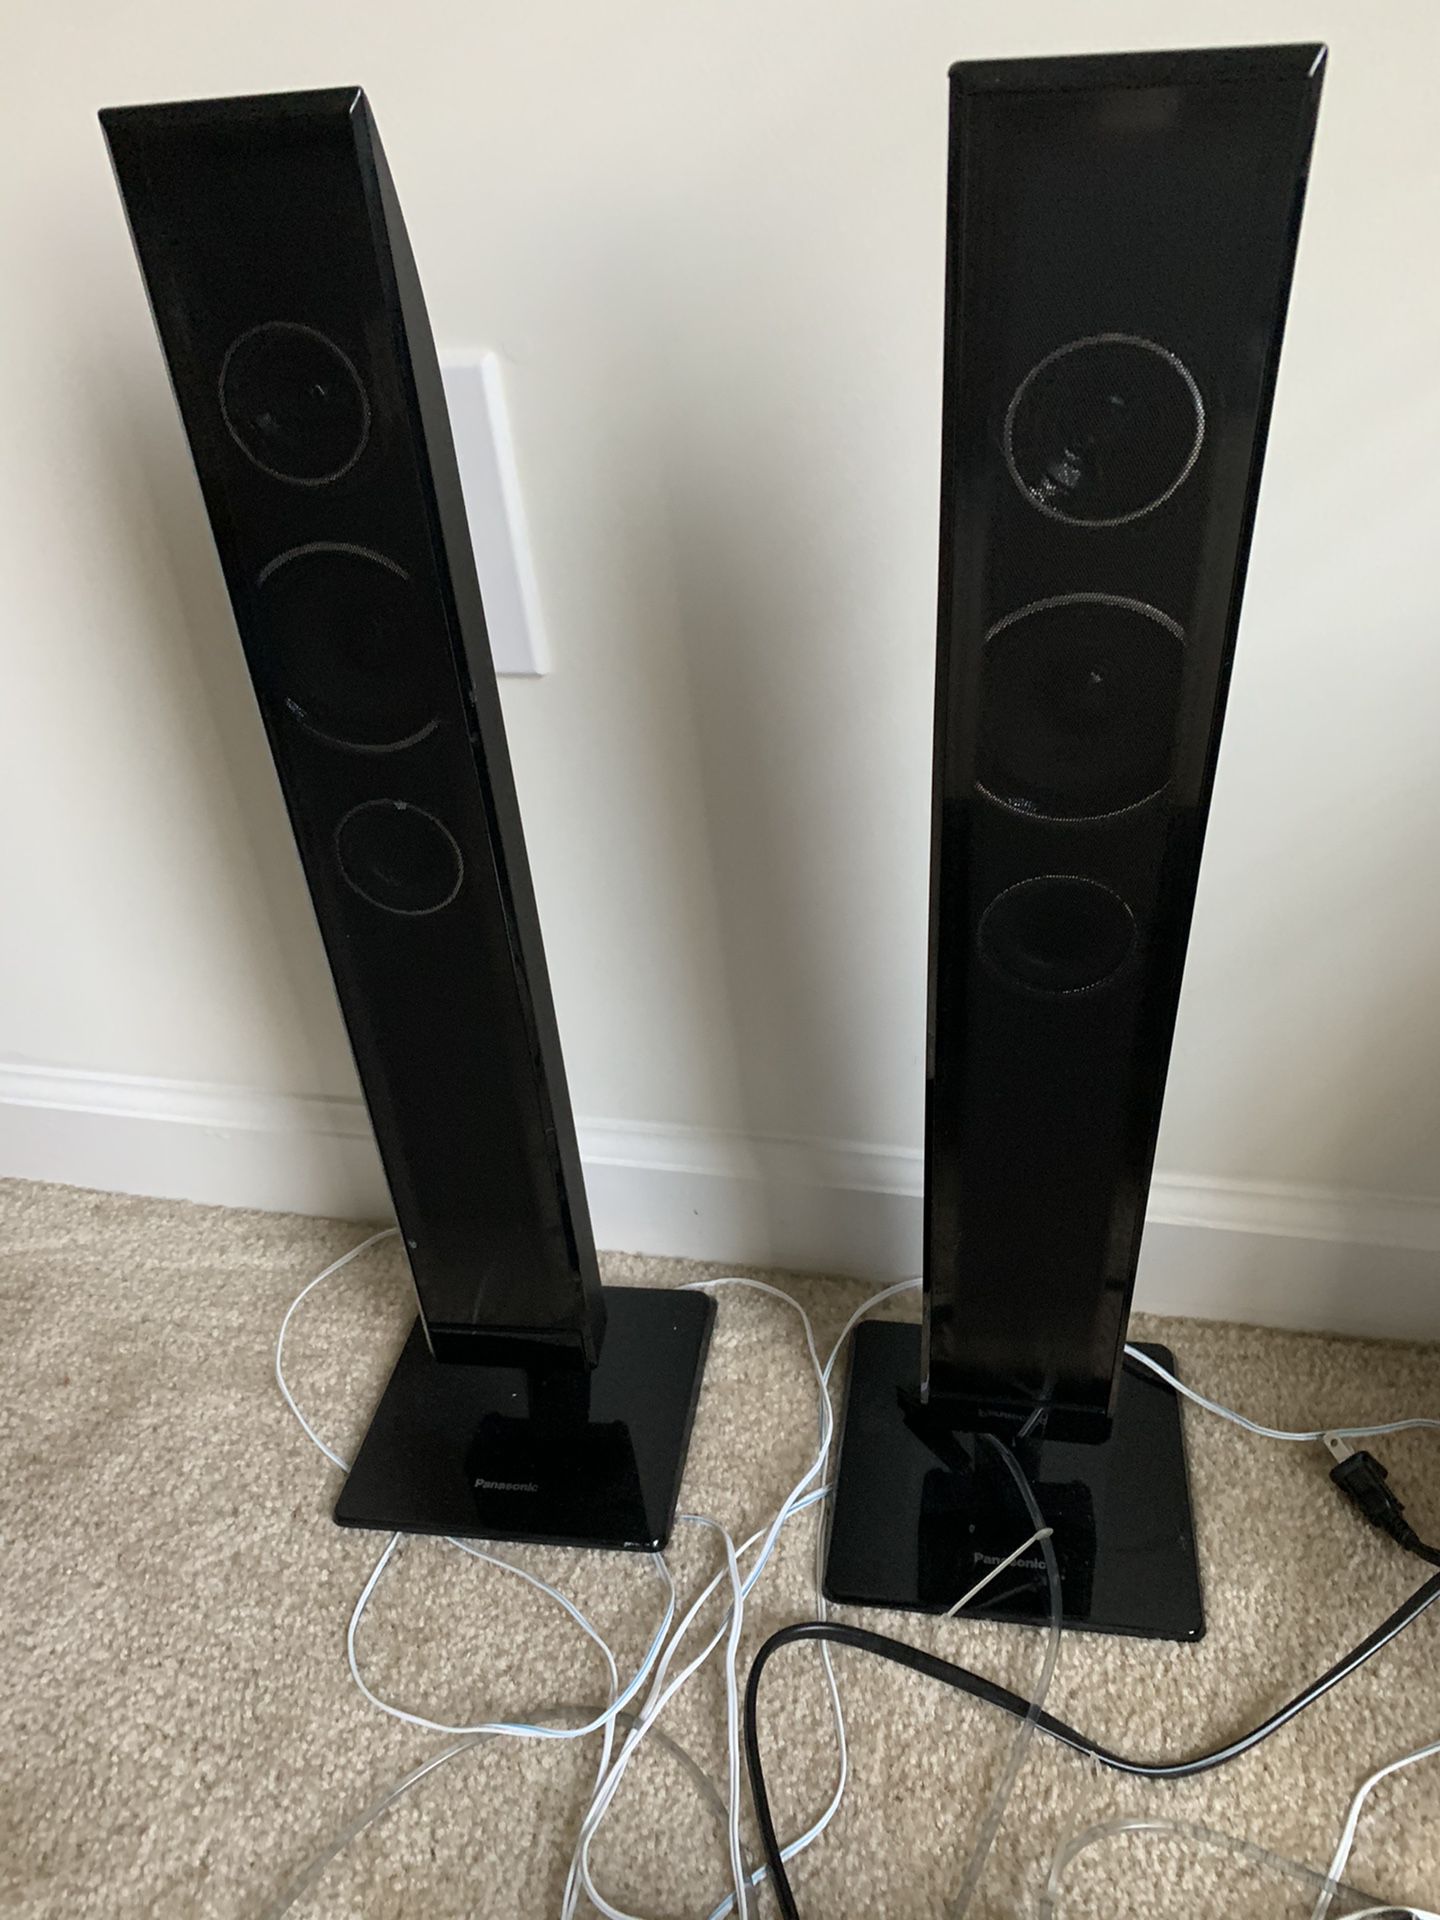 Panasonic Home Theatre Speakers and Subwoofer System for Sale in Chapel